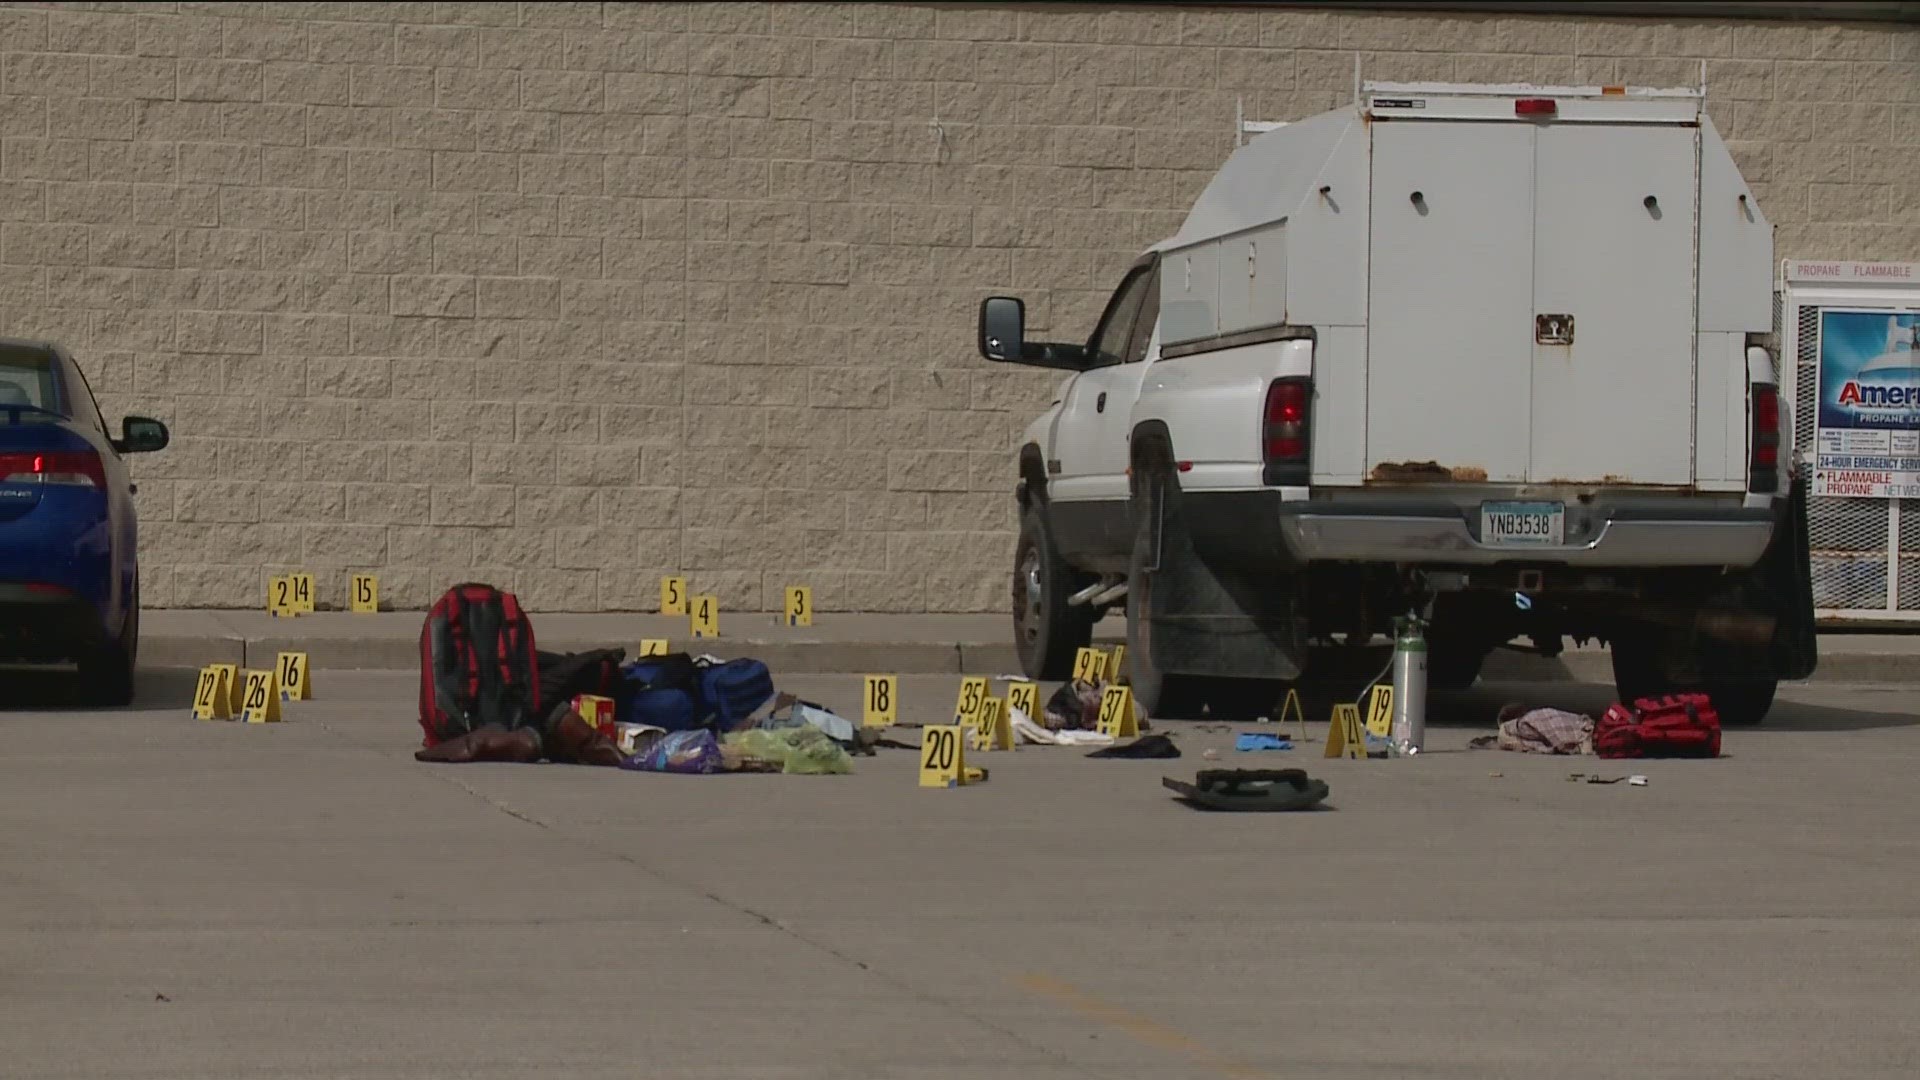 The Minnesota BCA has taken over the investigation after a Wright County deputy shot a suspect during an arrest warrant performed outside Dollar General in Montrose.